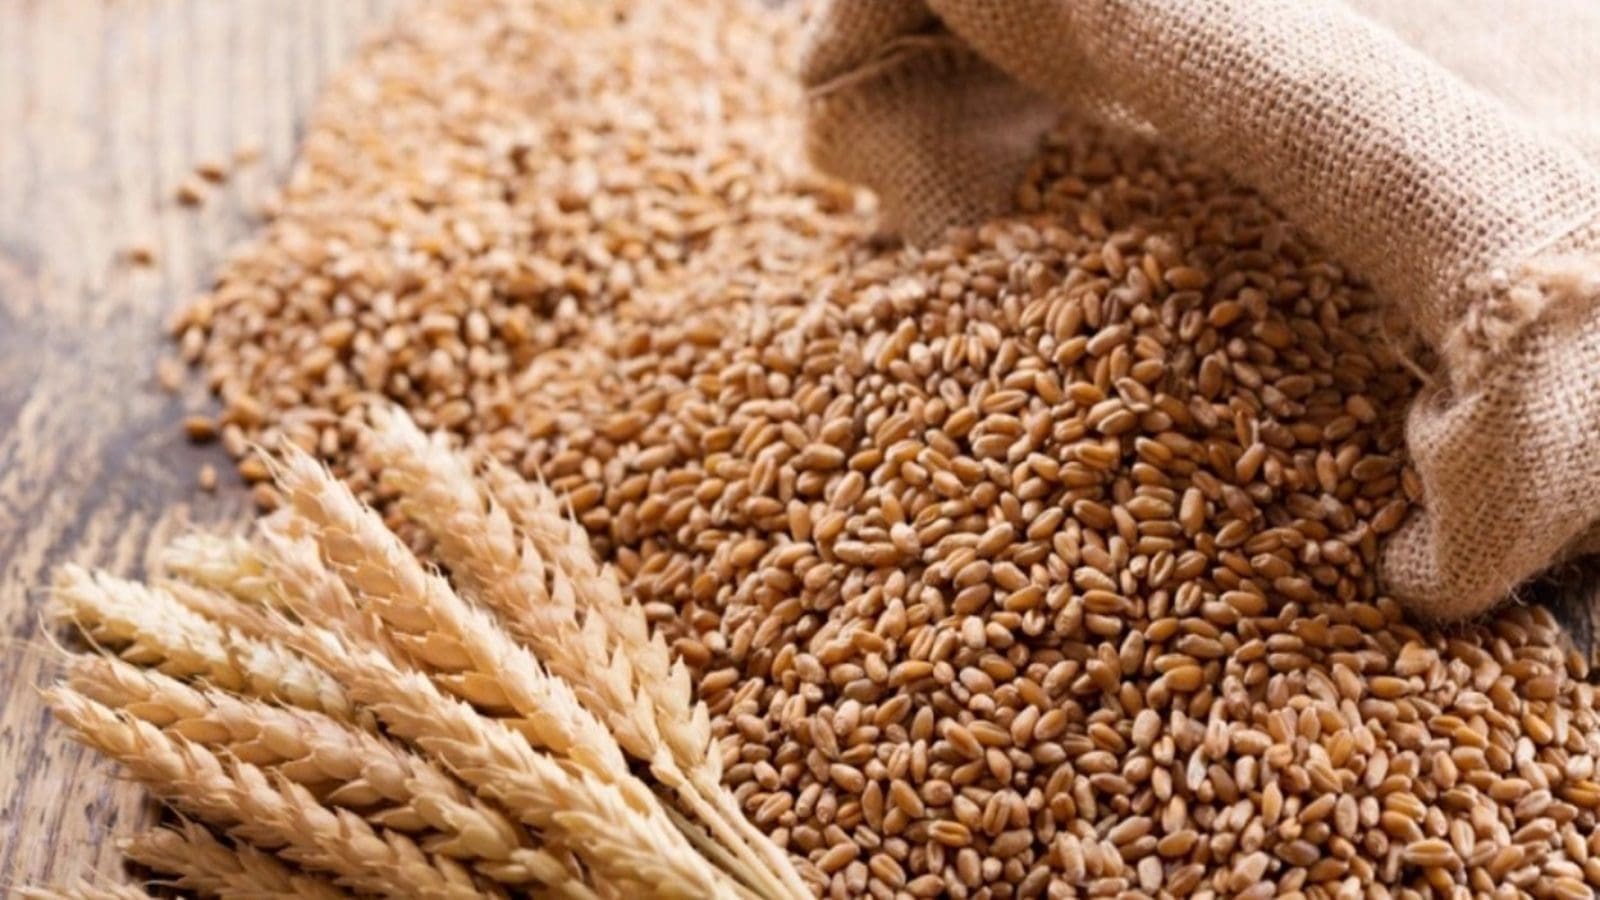 Zimbabwe achieves self-sufficiency in wheat, saves US$300M from import costs